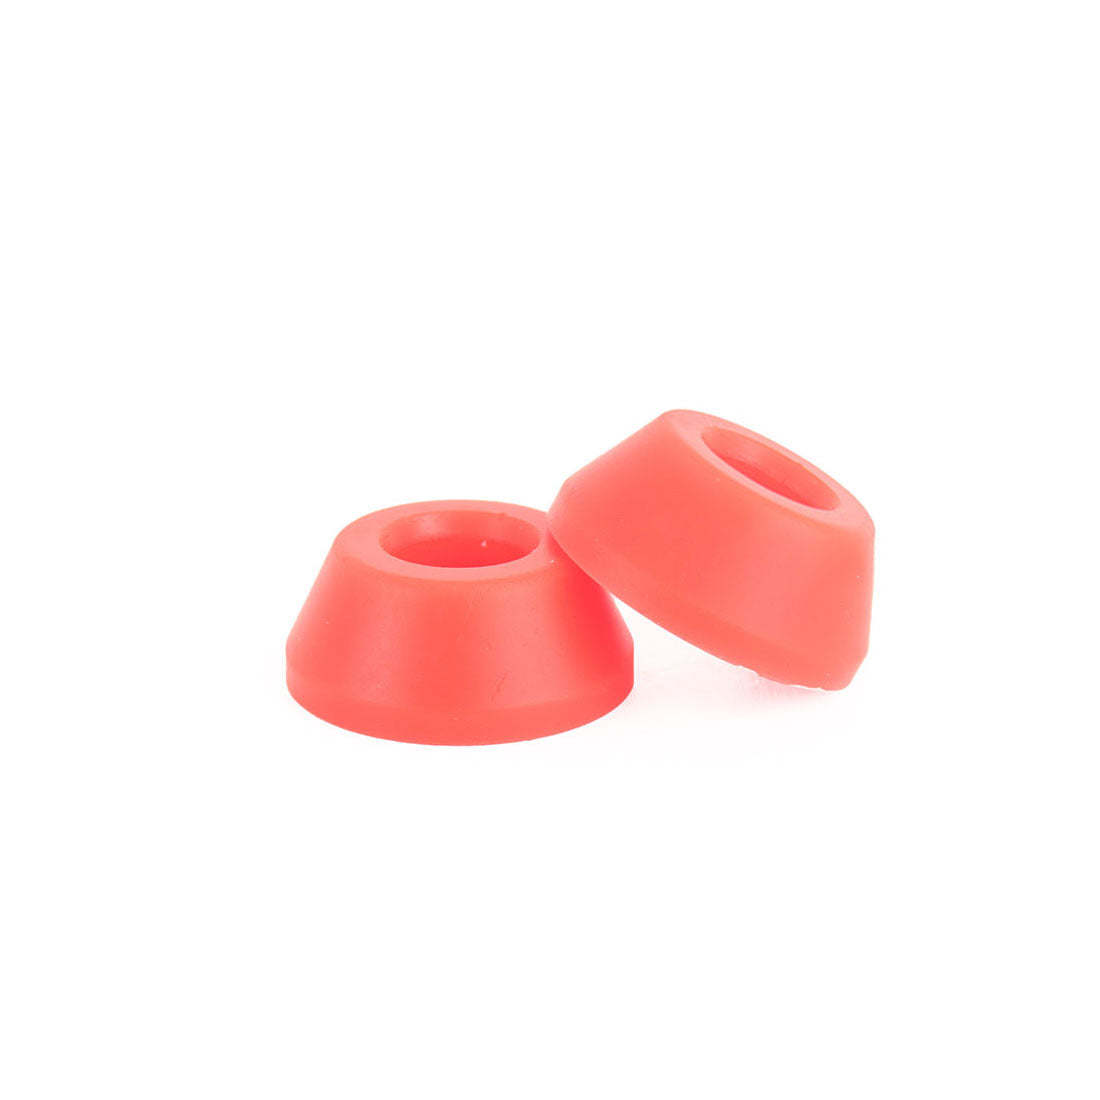 Spew Monkey 95a .450 Cone Bushings 2pk - Fluro Red Skateboard Hardware and Parts